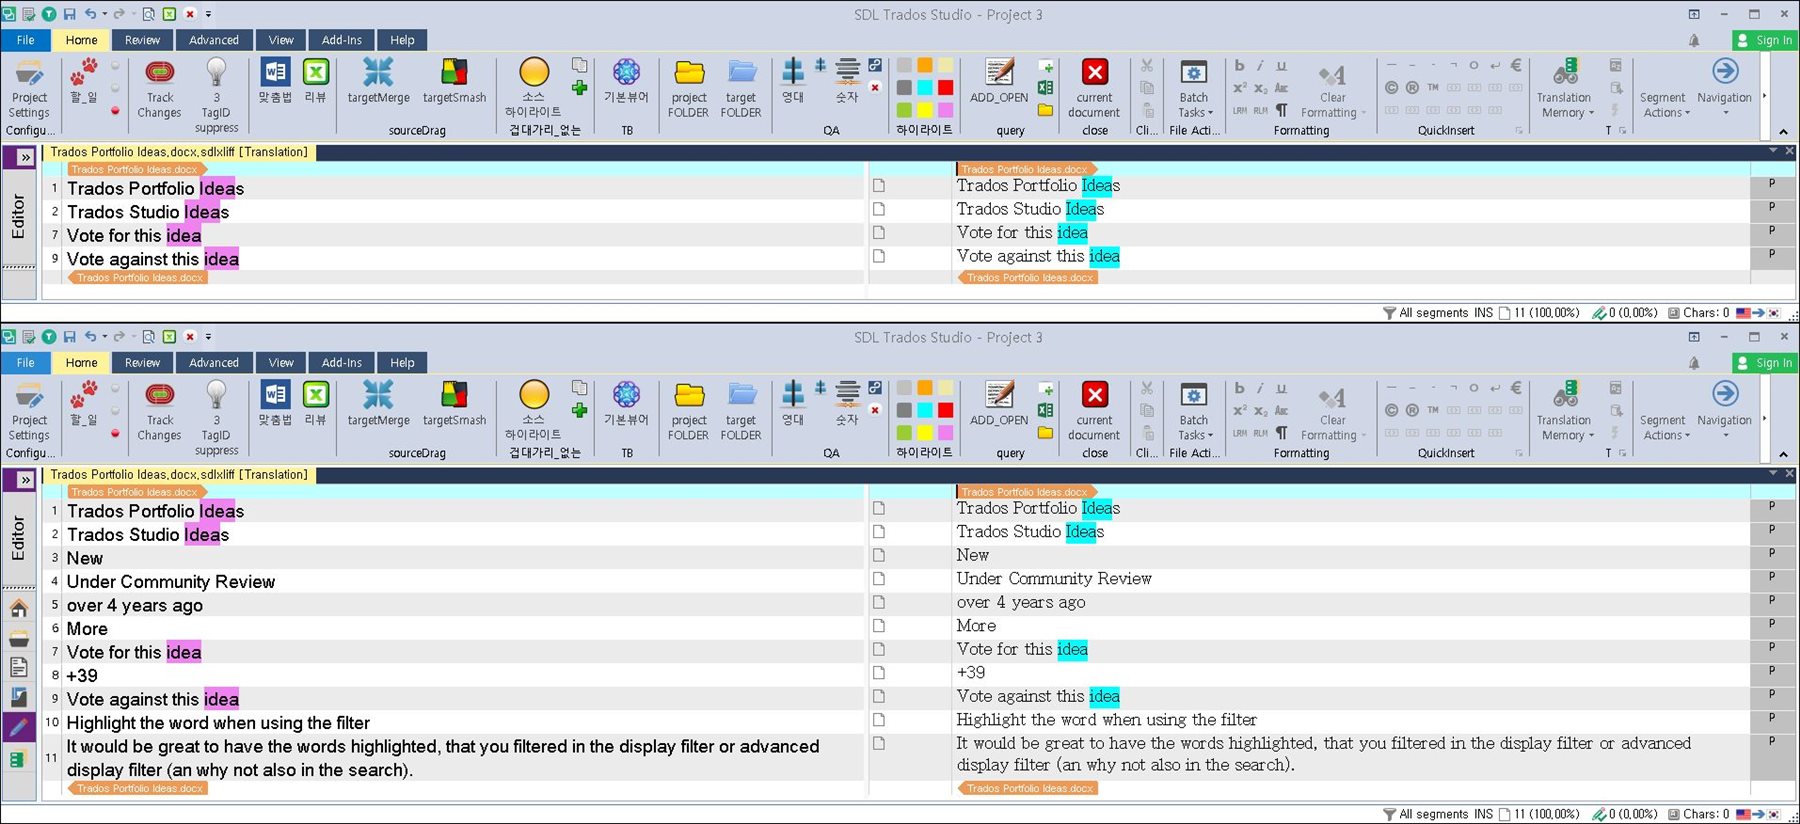 Screenshot of Trados Studio Ideas interface showing options to vote for or against ideas, with 'Trados Studio Ideas' and 'Vote against this idea' highlighted.